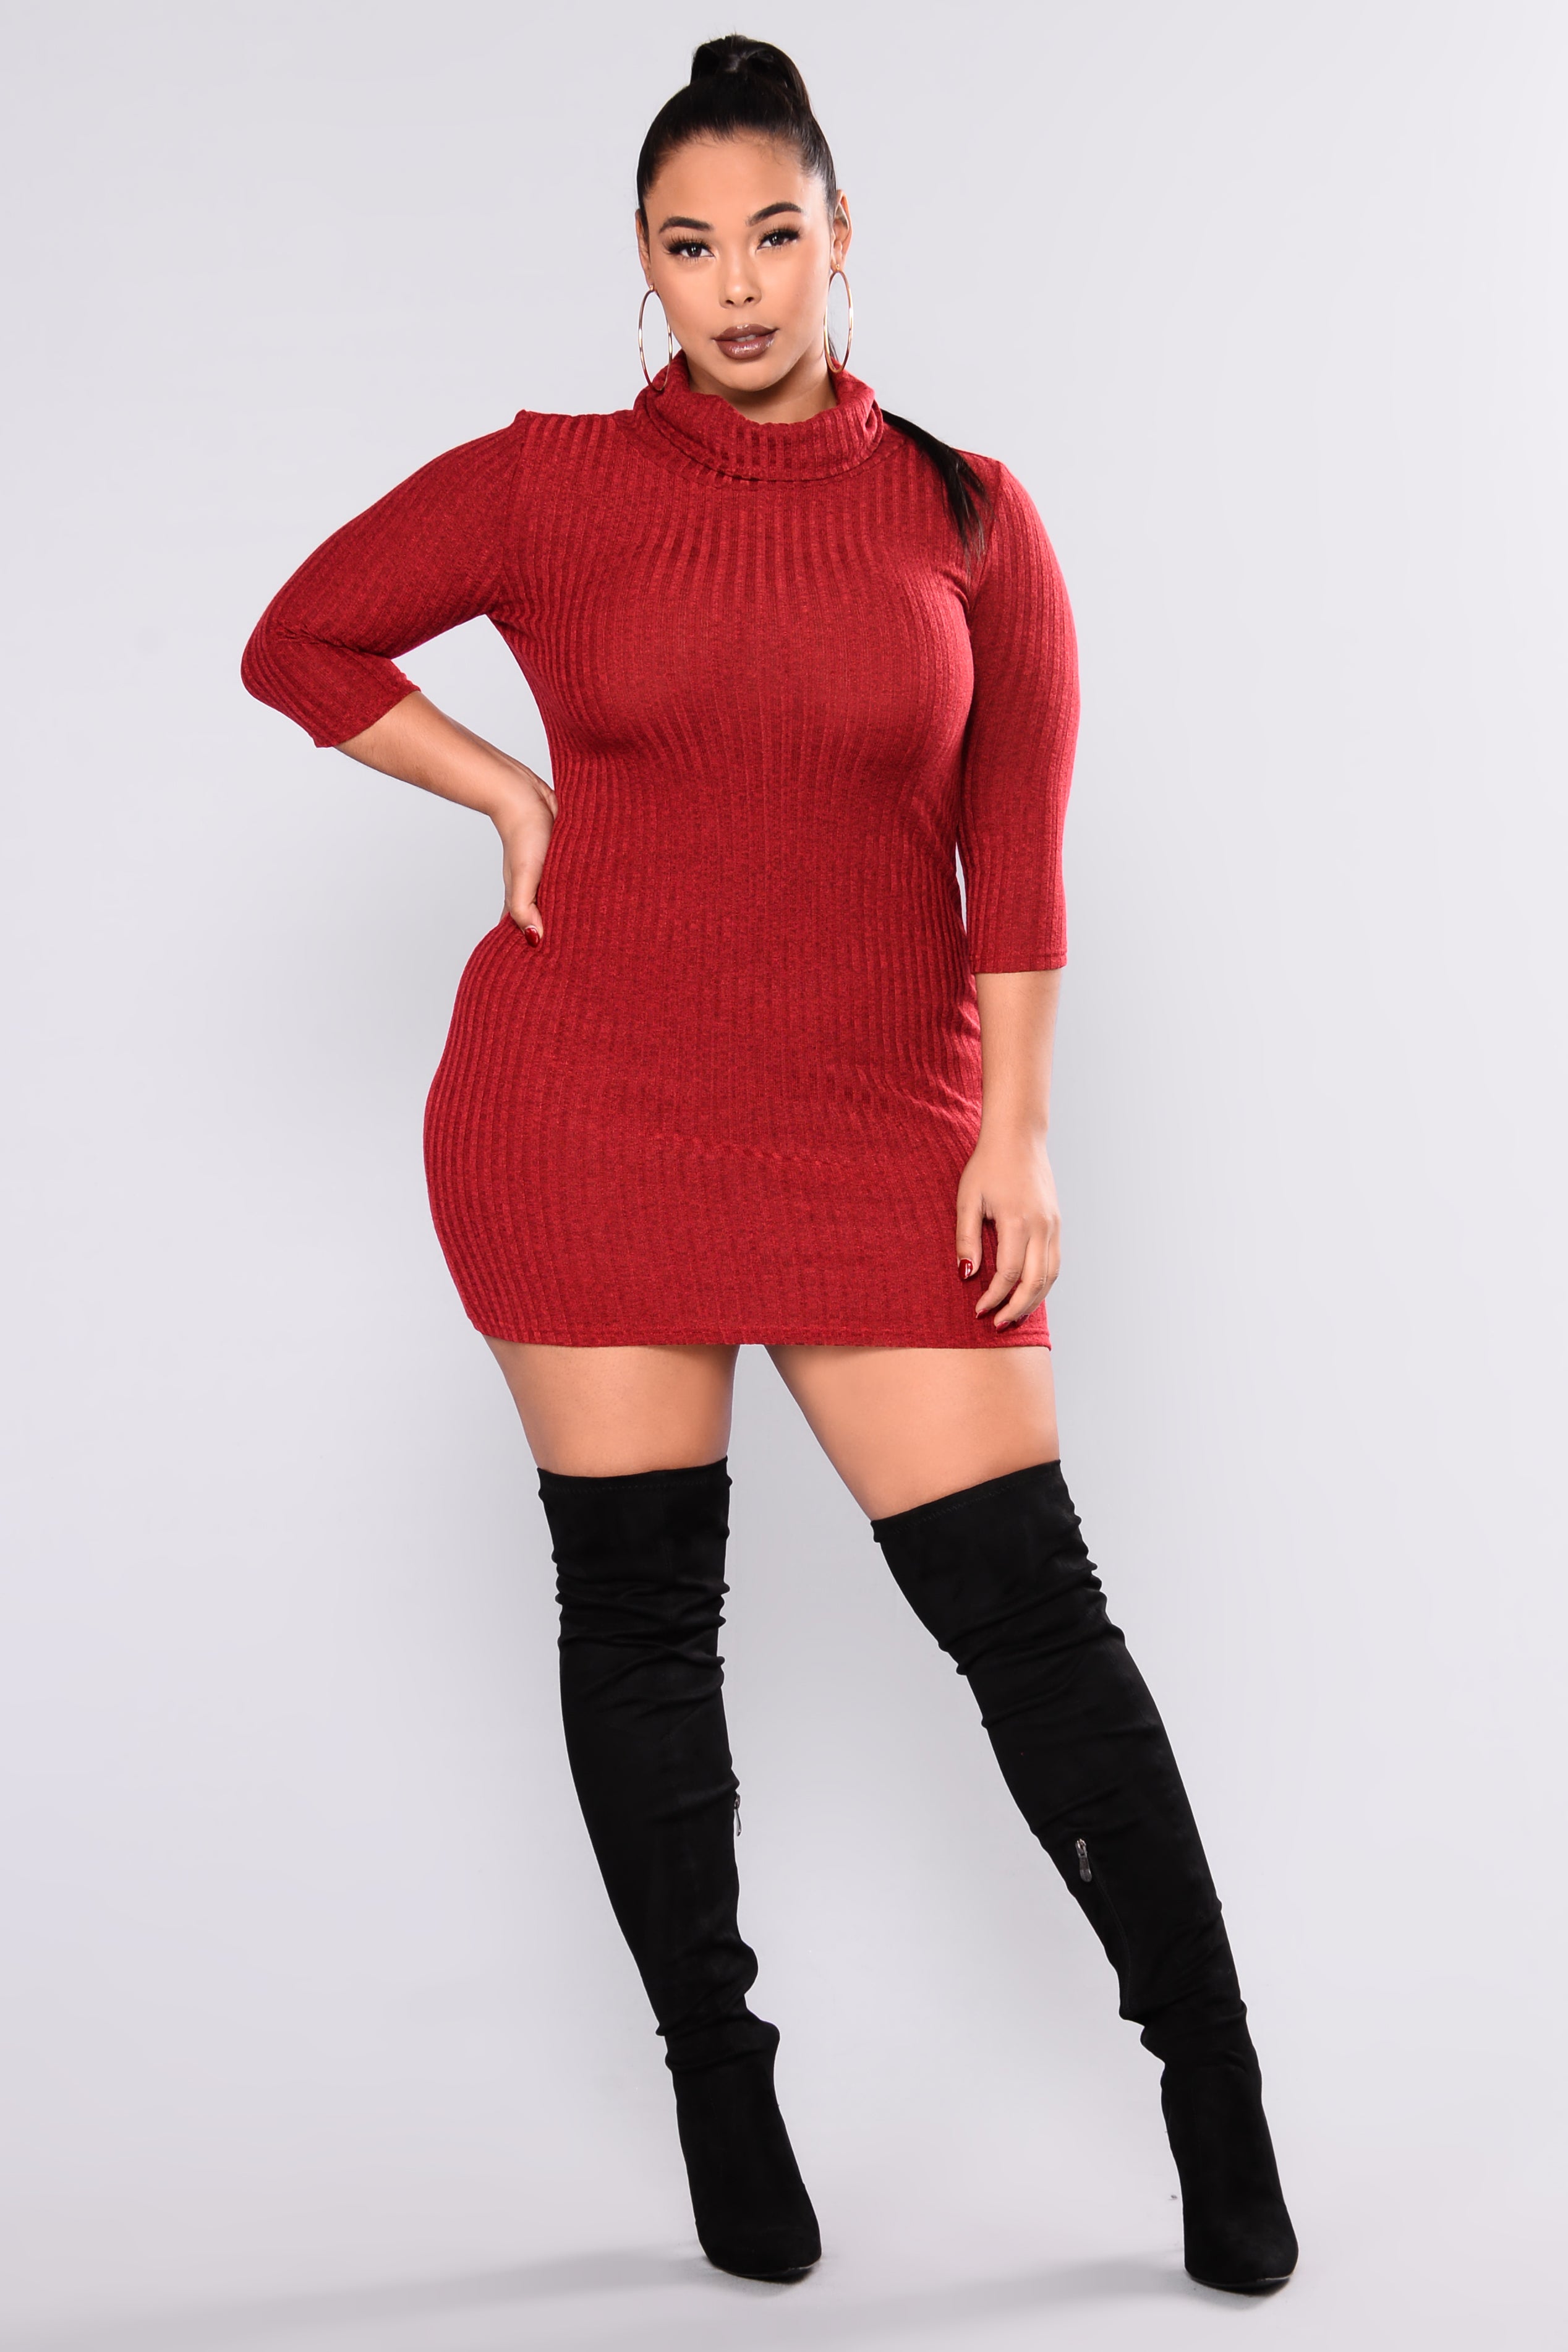 Autumn Leaves Sweater Dress Red 